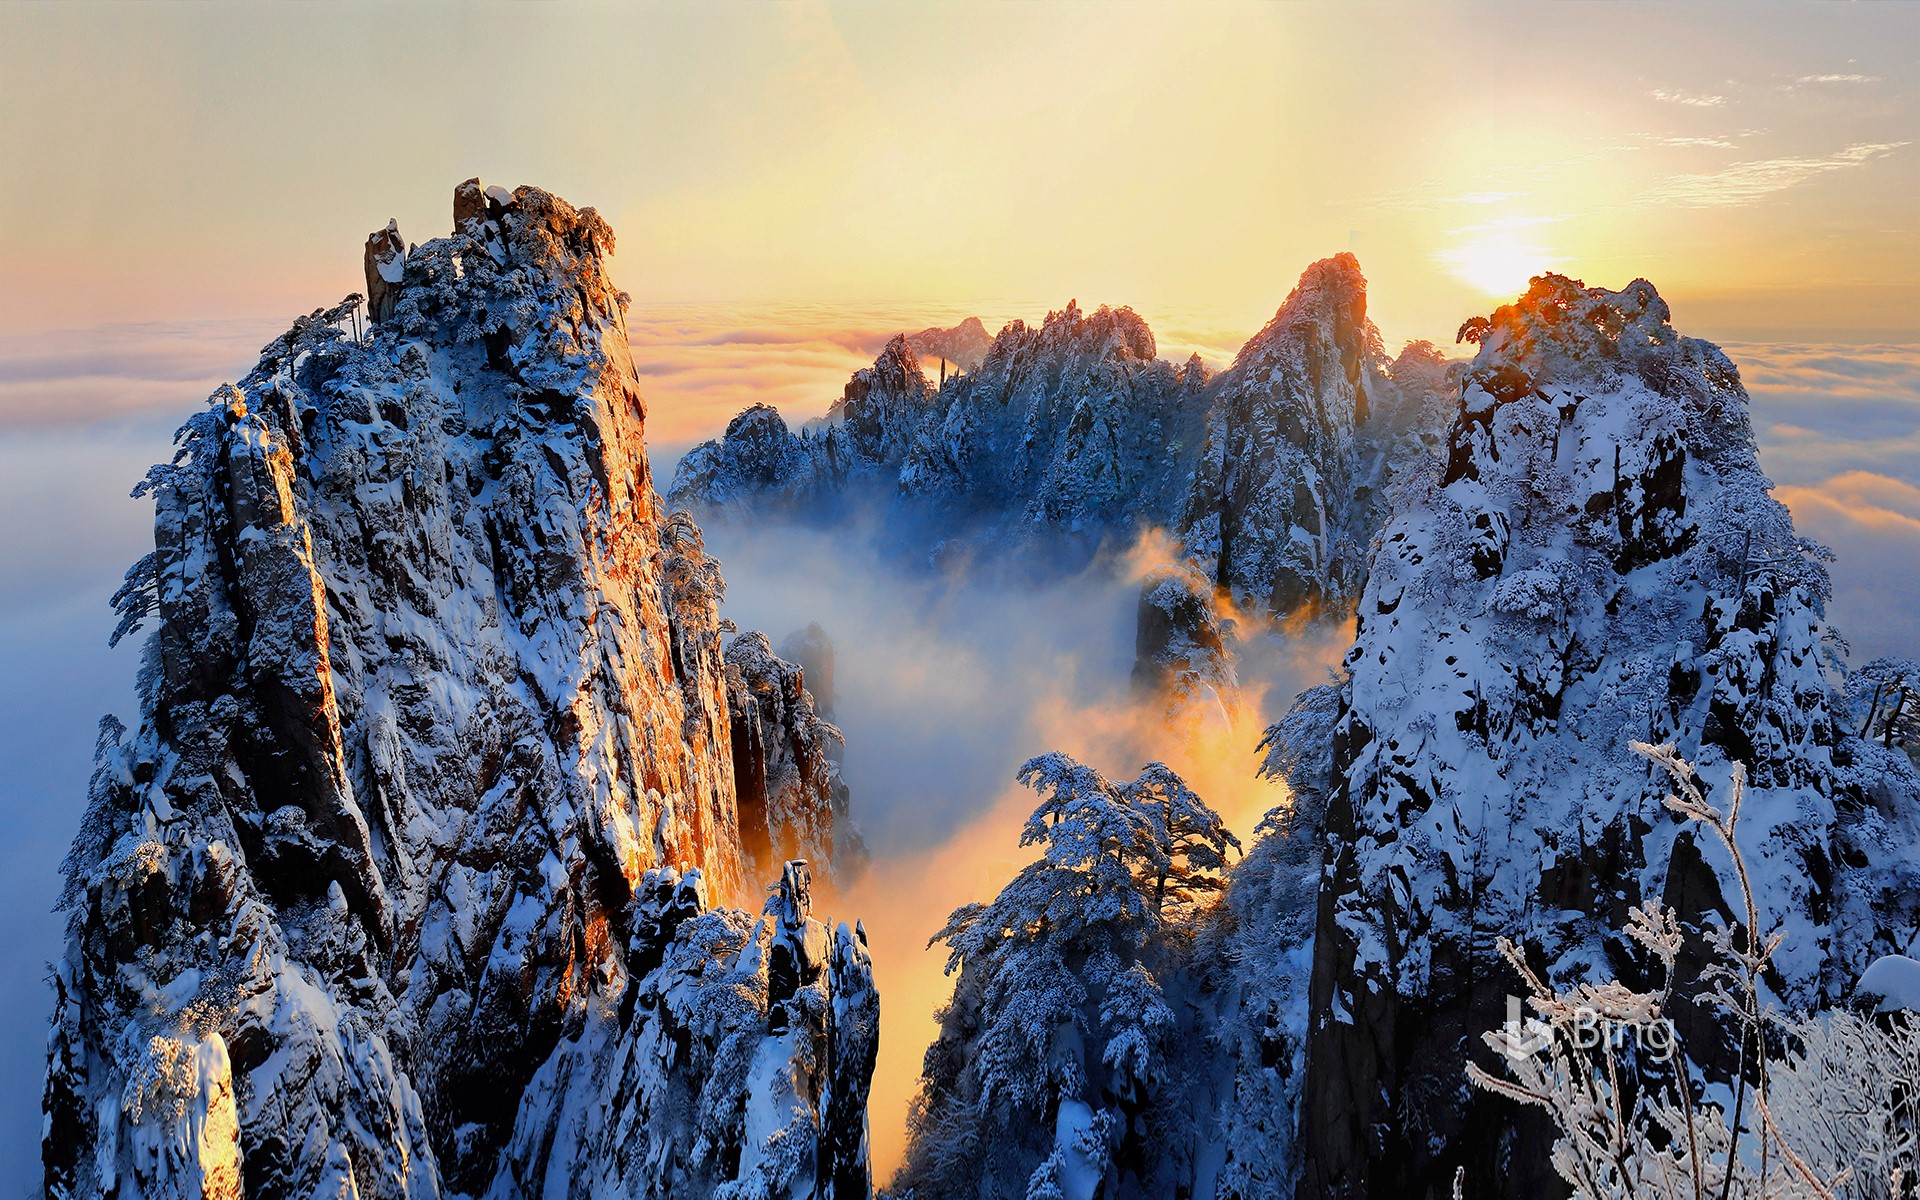 [Heavy Snow Today] Huangshan Scenic Area, Anhui Province